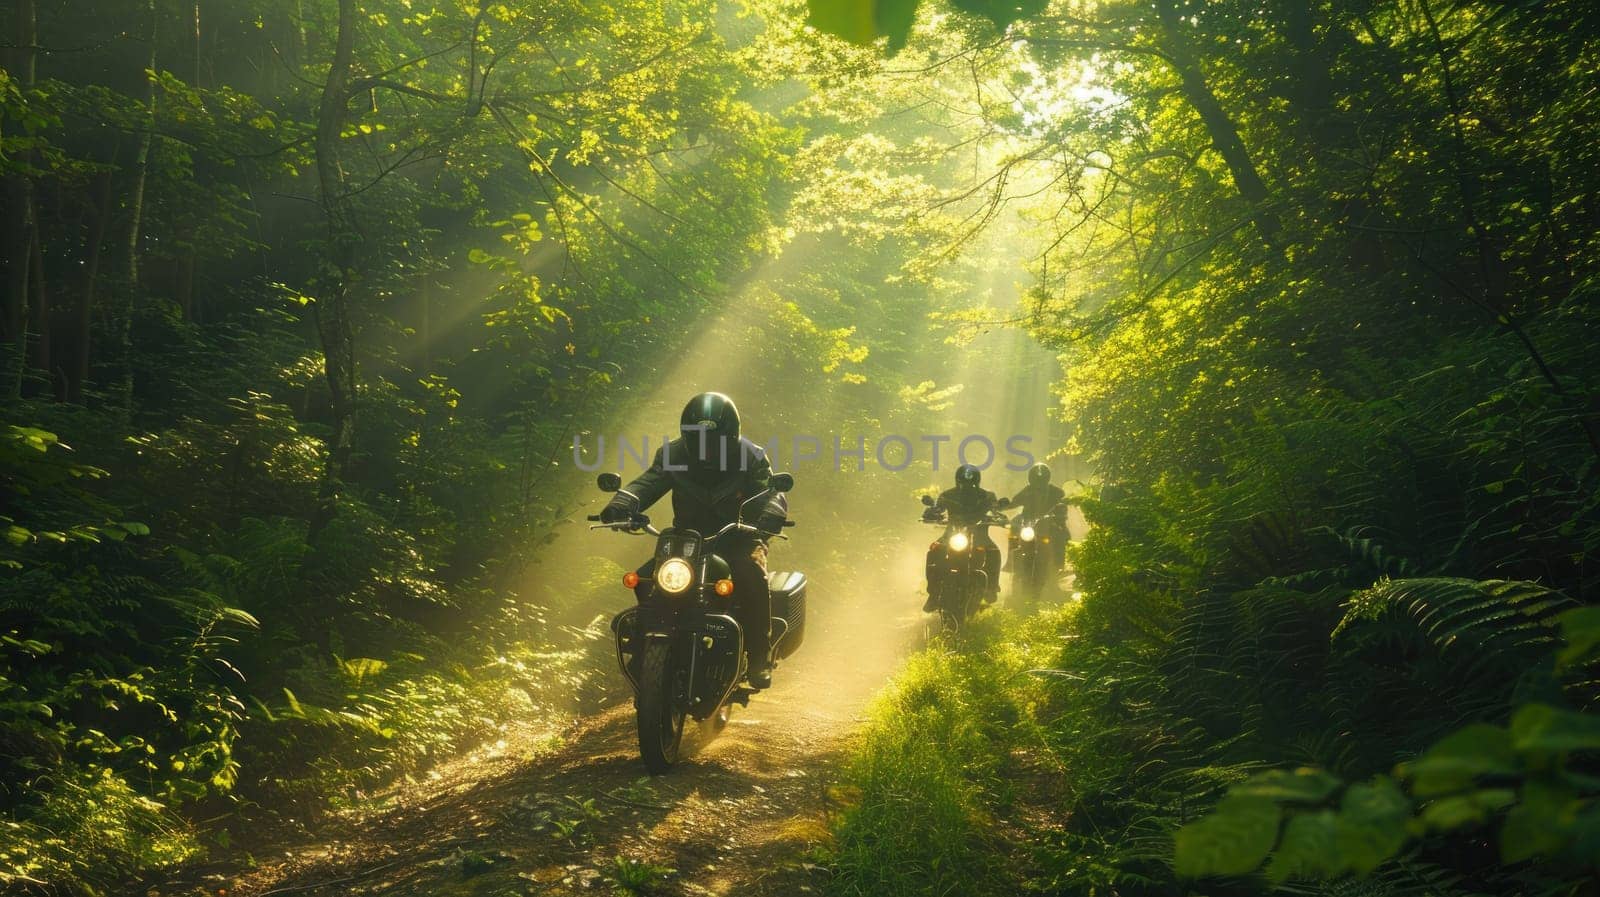 A group of motorcyclists riding through a forest trail.